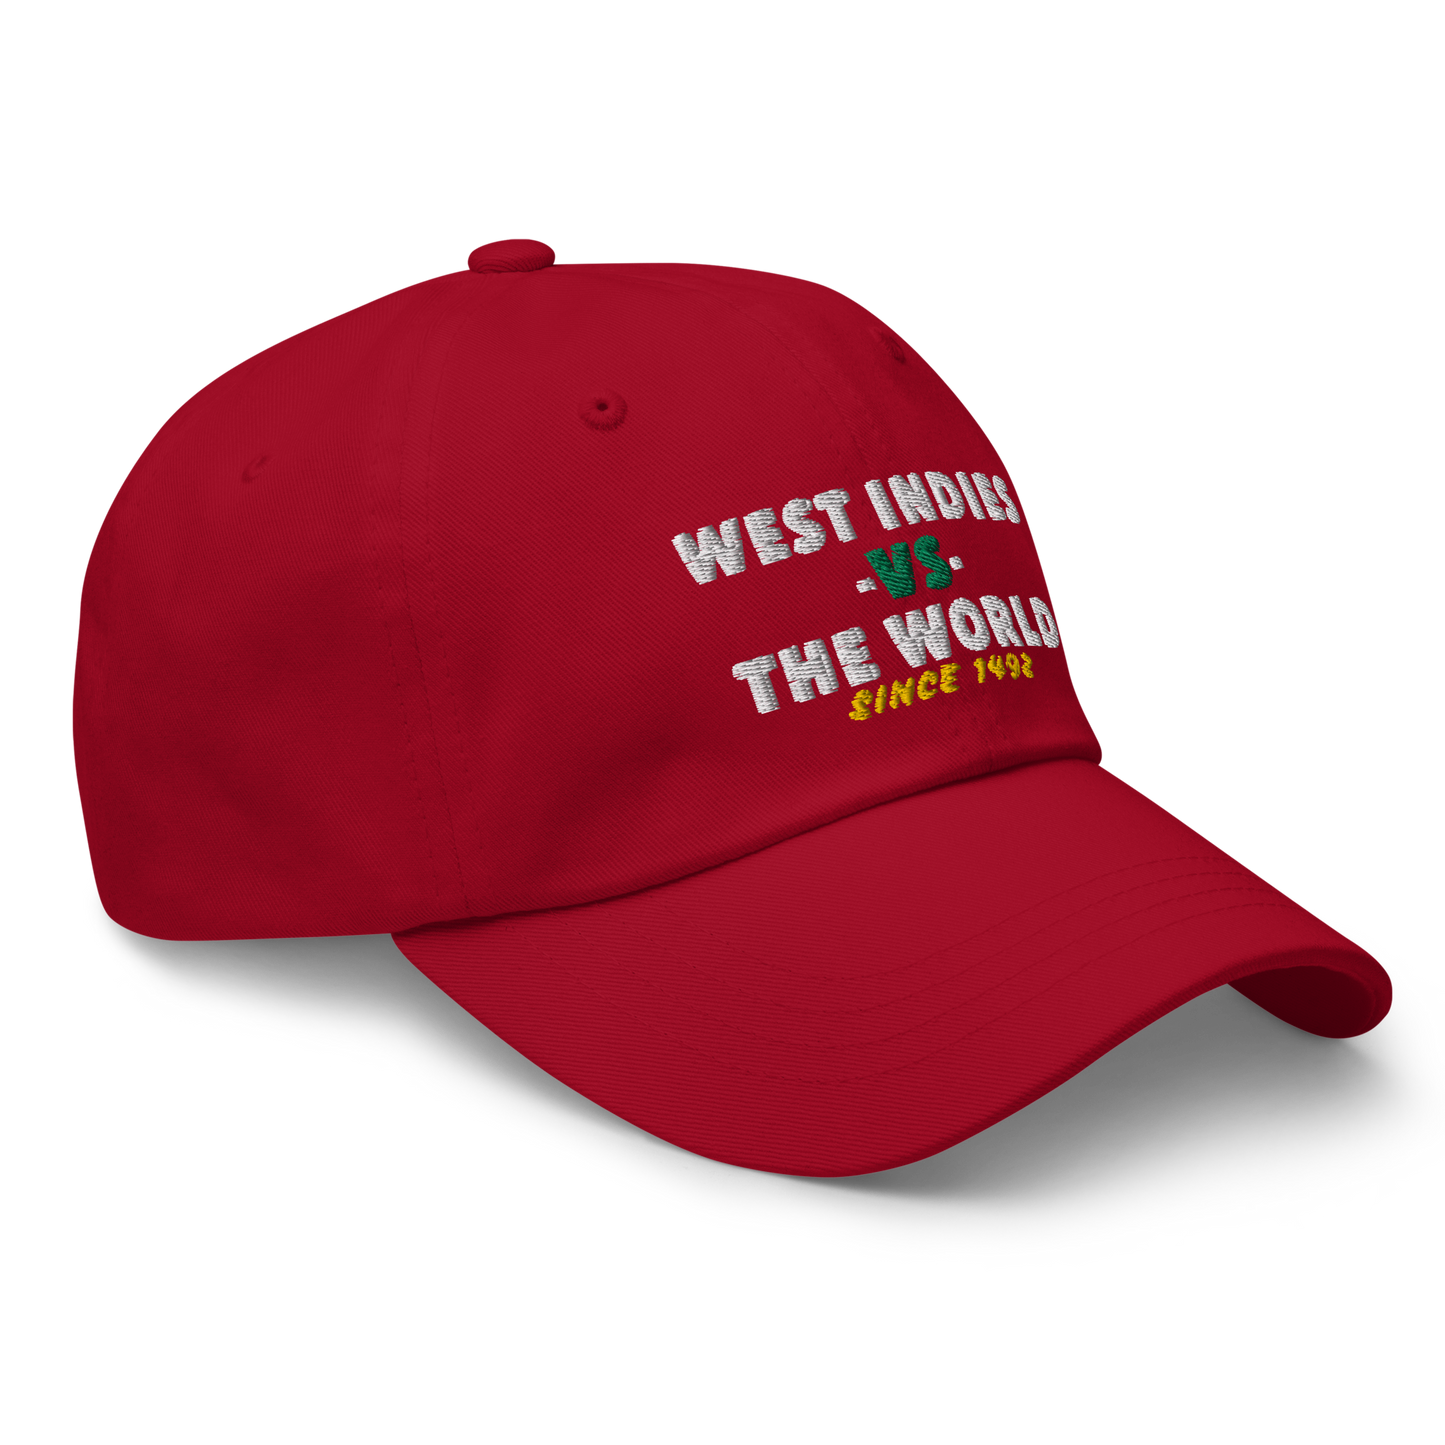 West Indies -vs- The World Dad hat